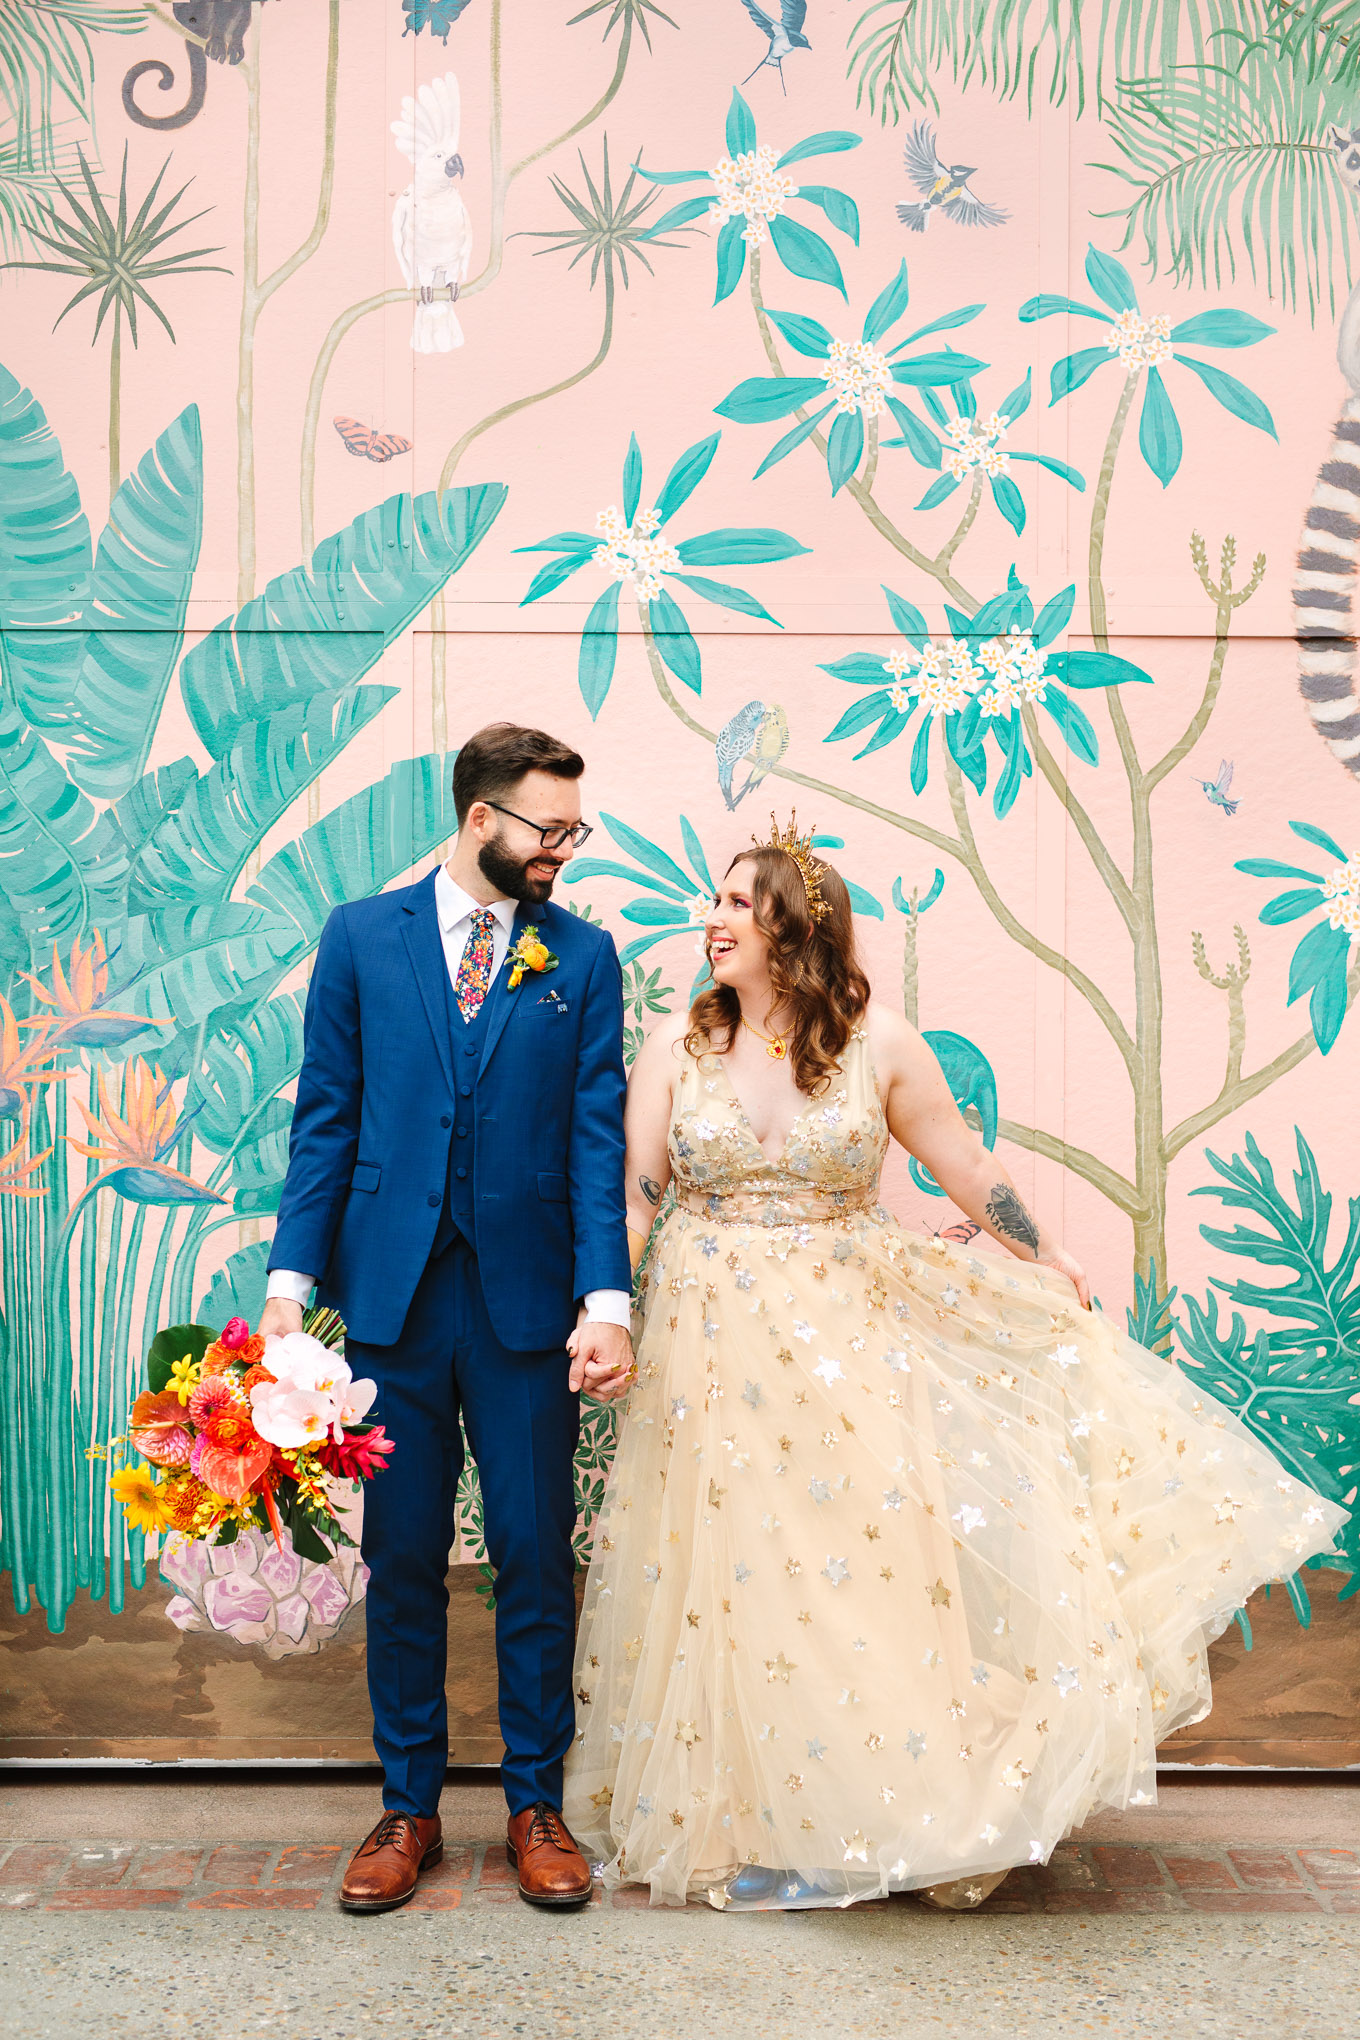 Bride and groom portrait in front of mural | Colorful Downtown Los Angeles Valentine Wedding | Los Angeles wedding photographer | #losangeleswedding #colorfulwedding #DTLA #valentinedtla   Source: Mary Costa Photography | Los Angeles